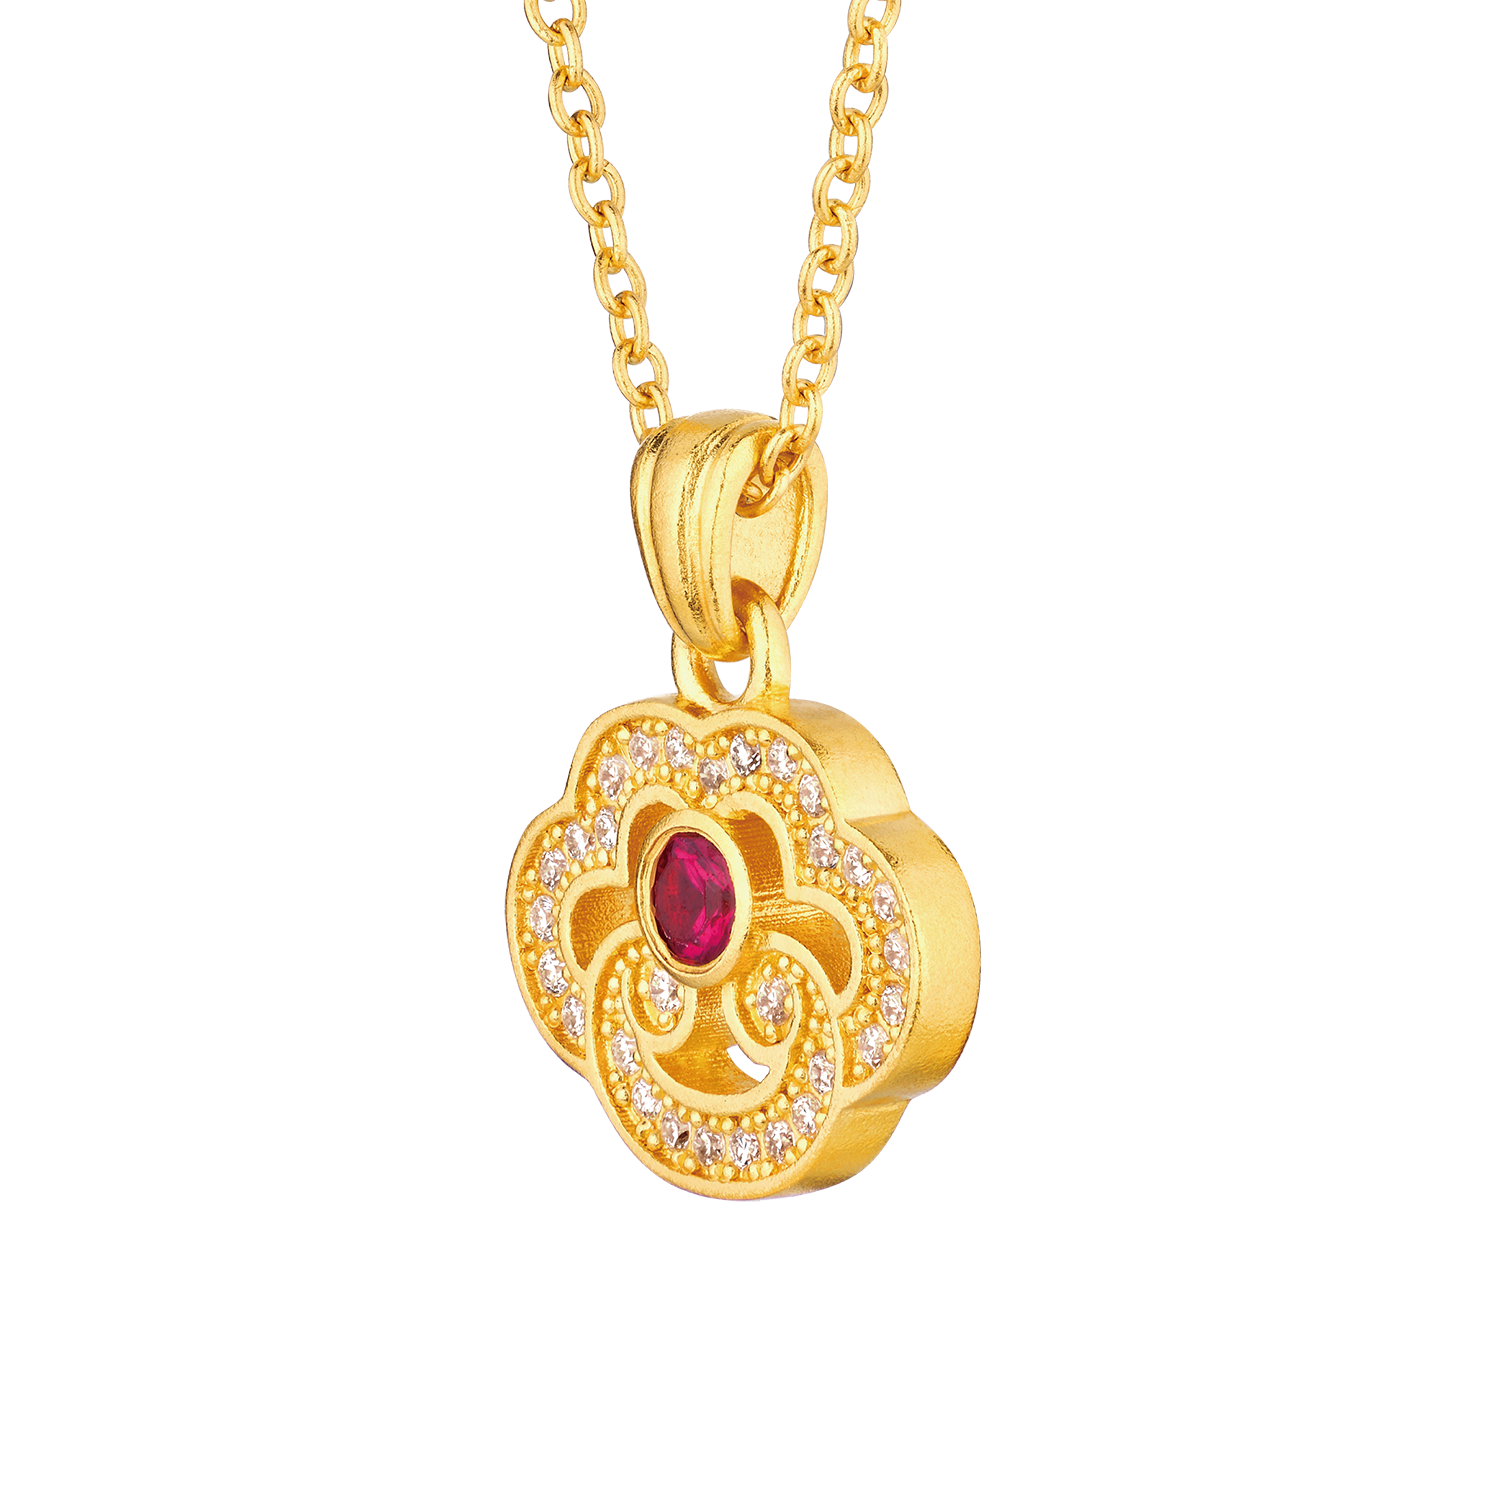 Heirloom Fortune Collection Tang Dynasty Style "Auspicious Ruyi" Gold Ruby and Diamond Pendant 